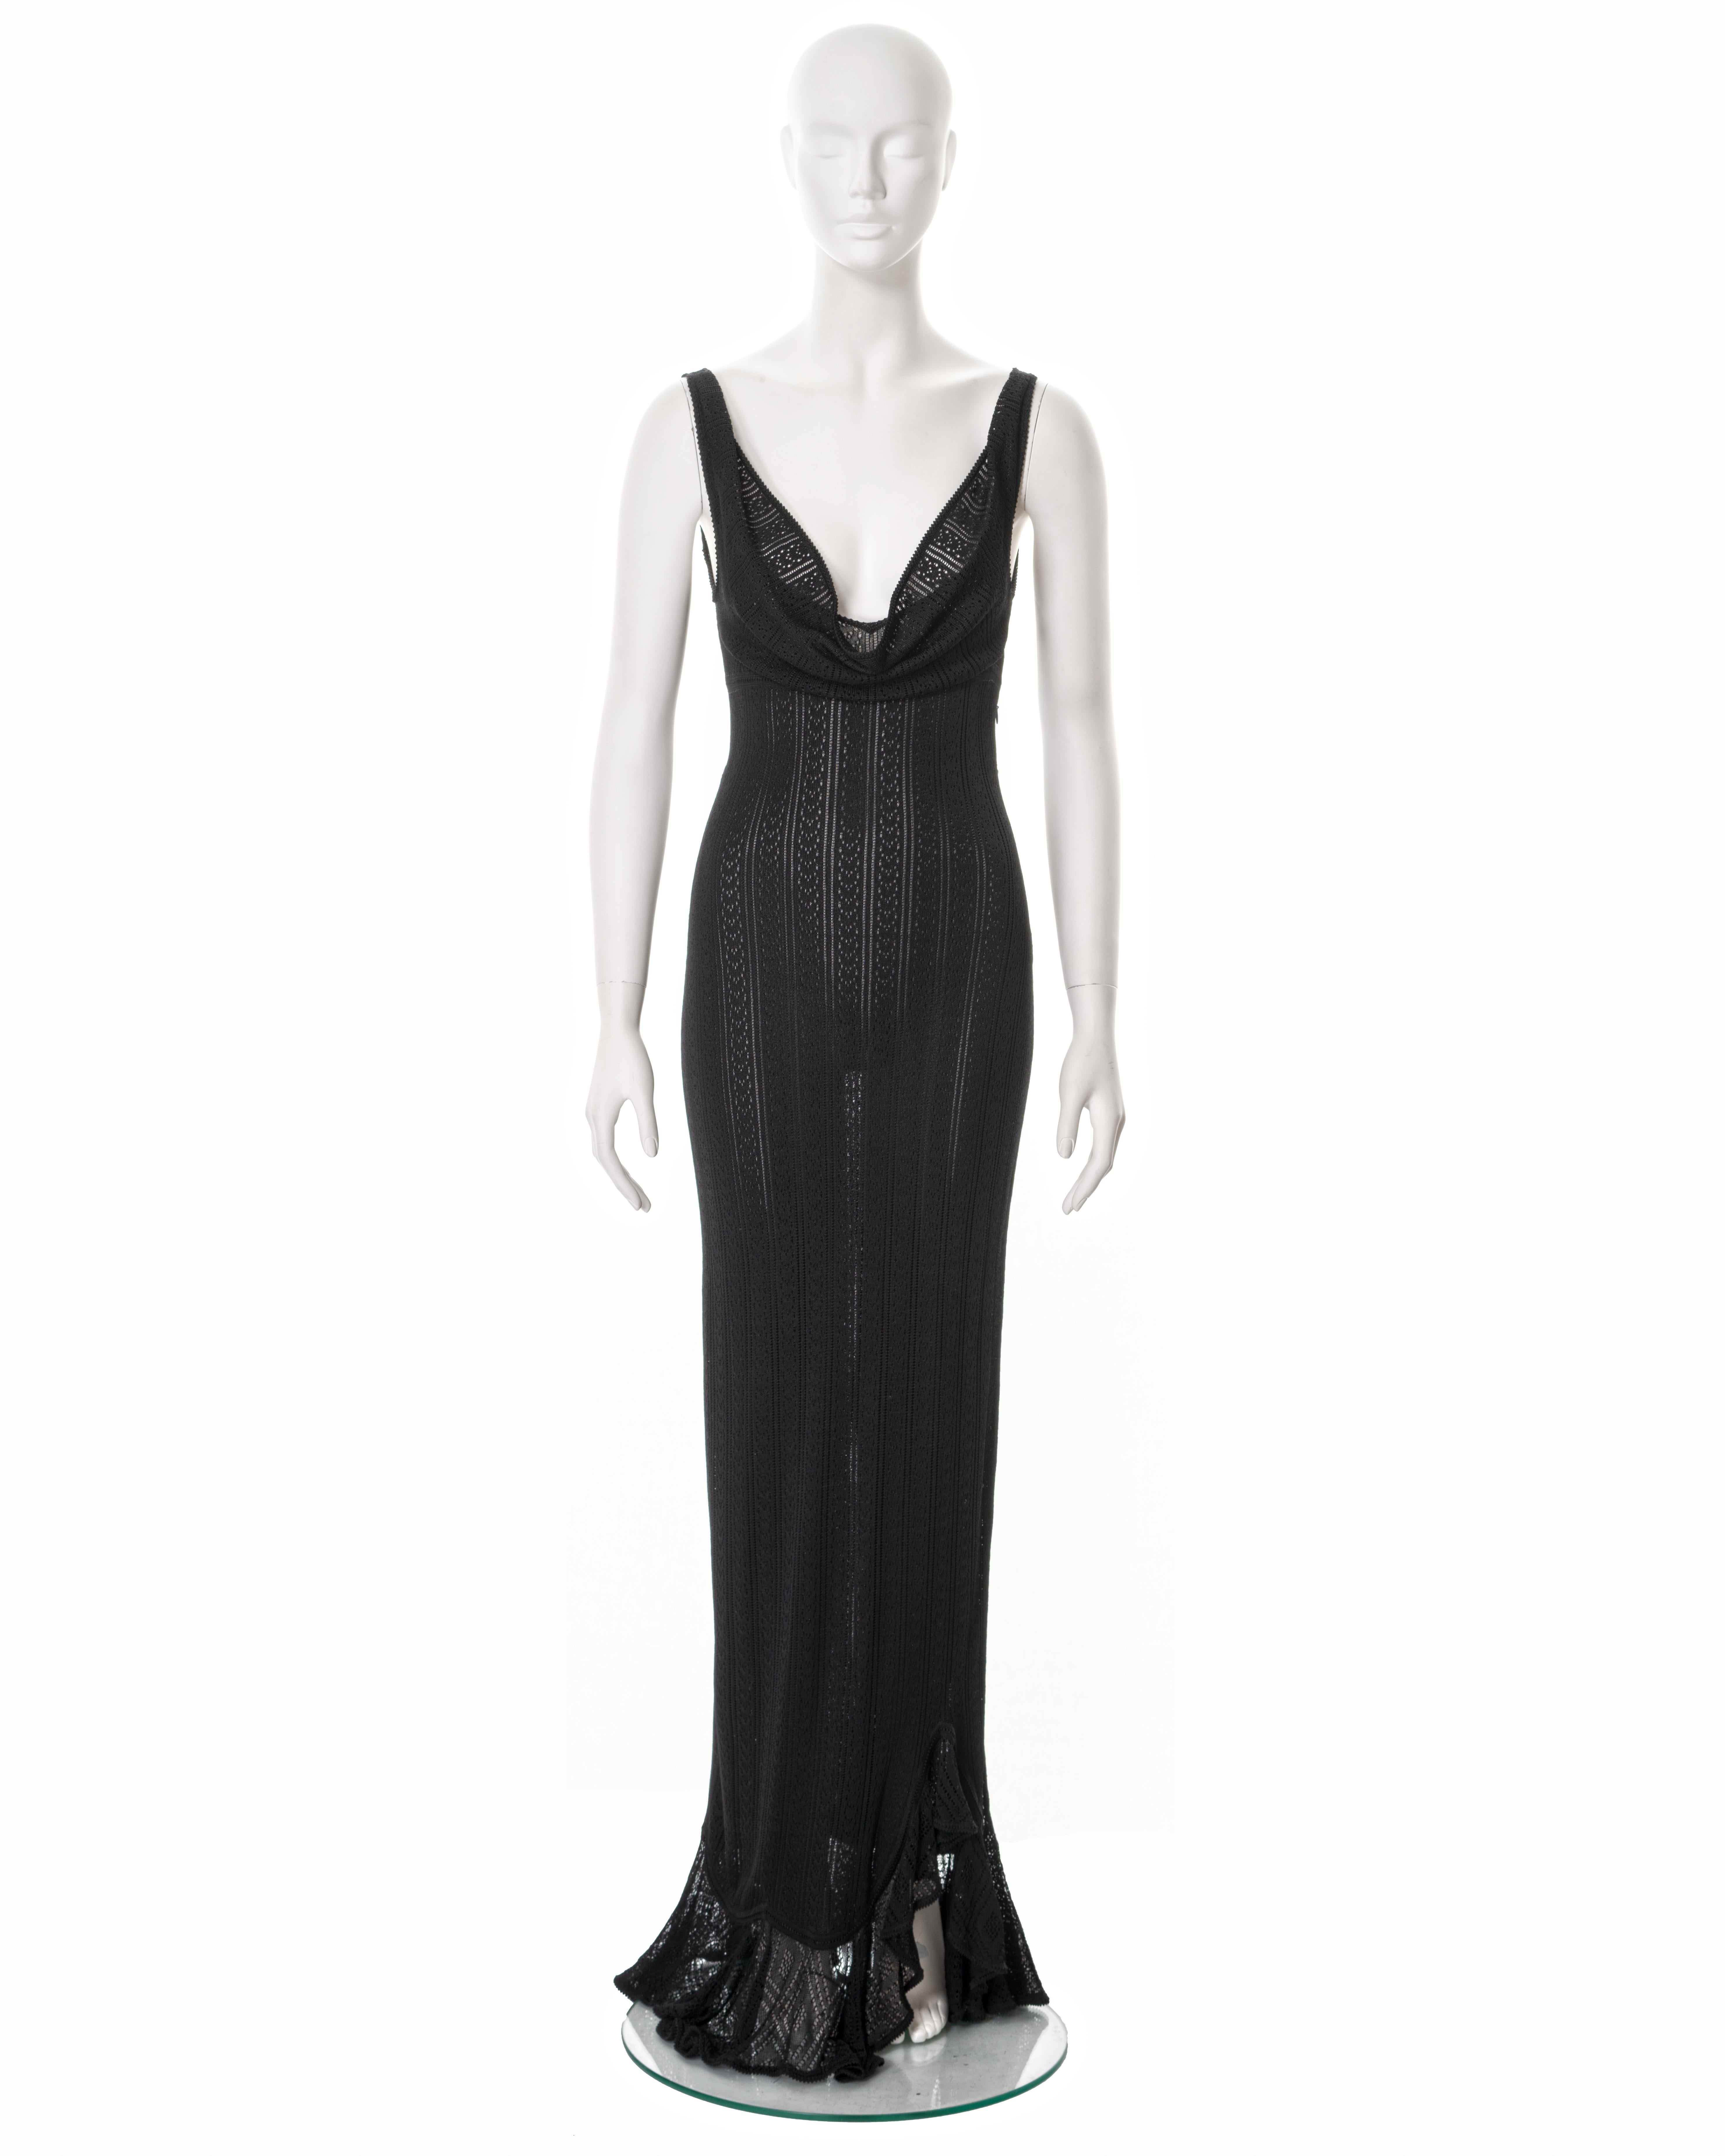 ▪ John Galliano evening dress
▪ Spring-Summer 1998
▪ Constructed from black viscose knitted lace 
▪ Cowls to the front and back 
▪ Plunging neckline 
▪ Open low back
▪ Floor length skirt with flounced hemline 
▪ Size Medium
▪ Made in Italy  

All